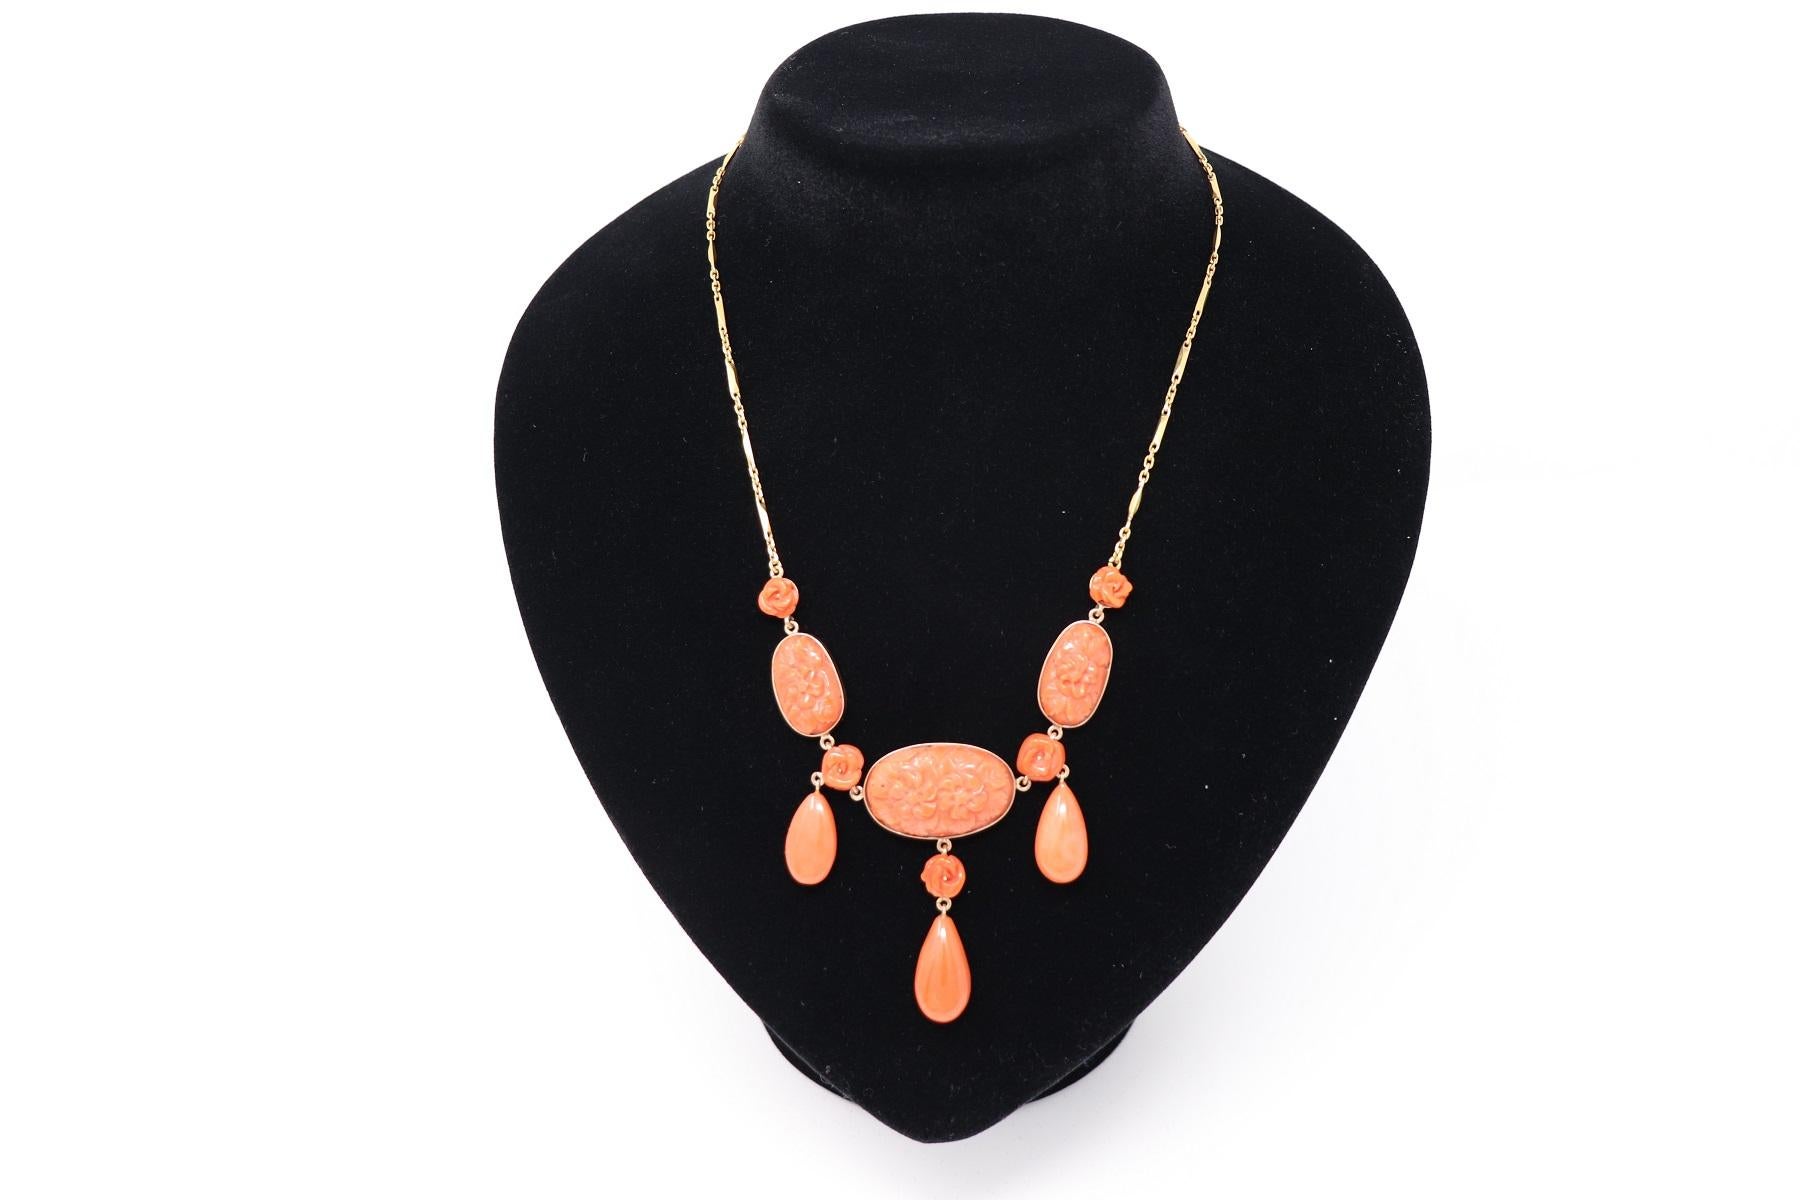 Refined necklace in 18 karat gold chain characterized by coral pendants. Coral worked with floral motifs. Necklace of great elegance Italian goldsmith production. This necklace ideal for an elegant summer evening.